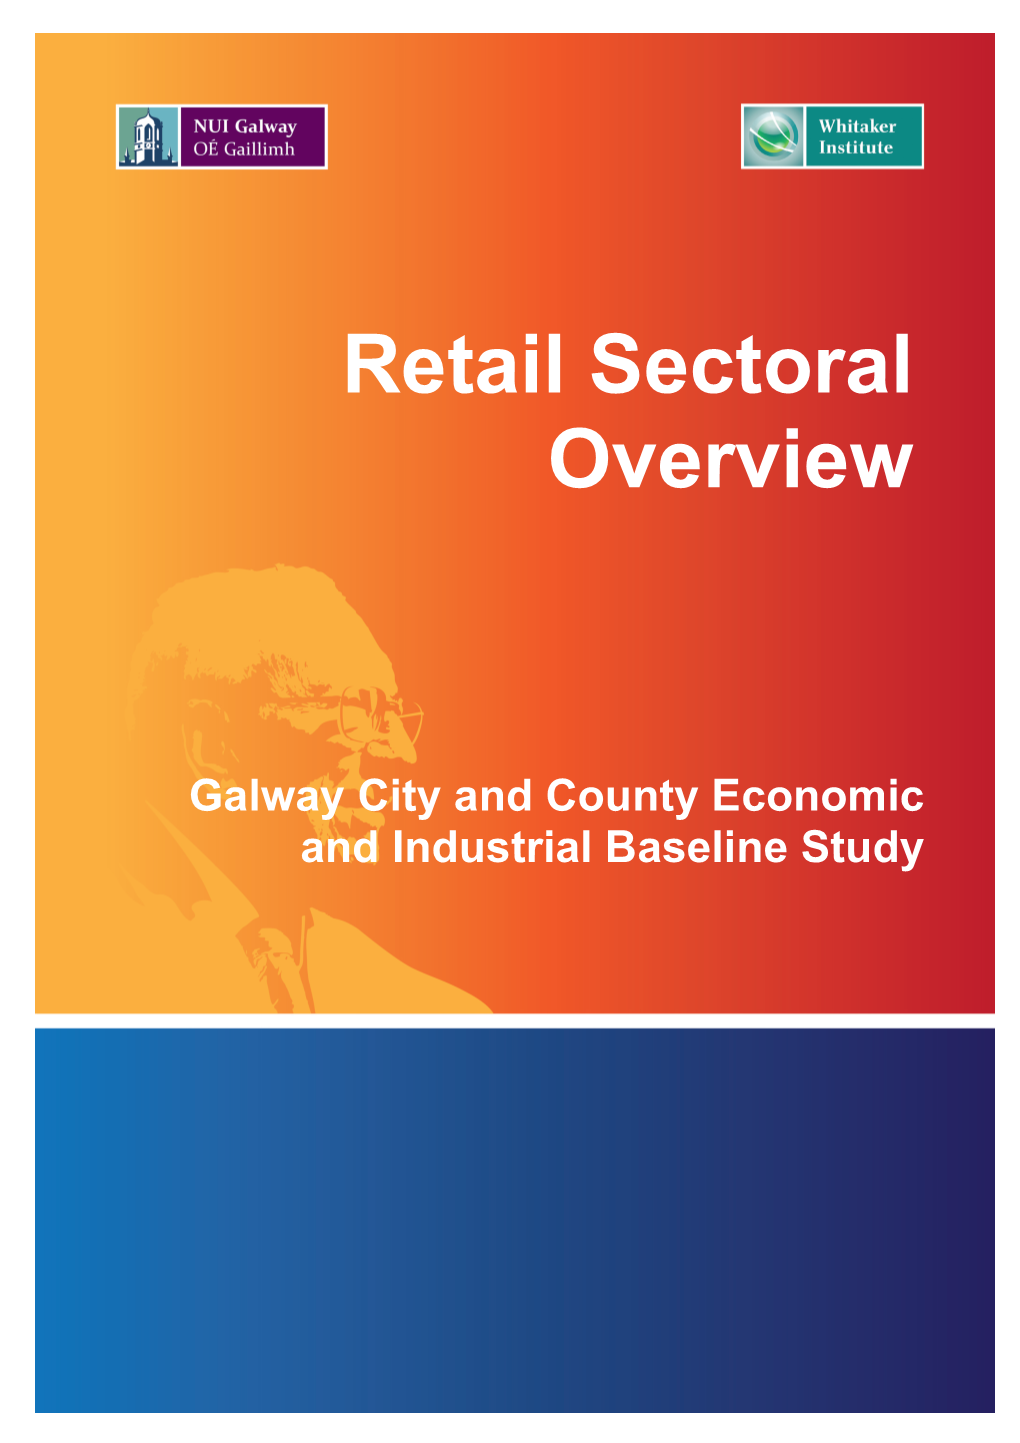 Retail Sectoral Overview